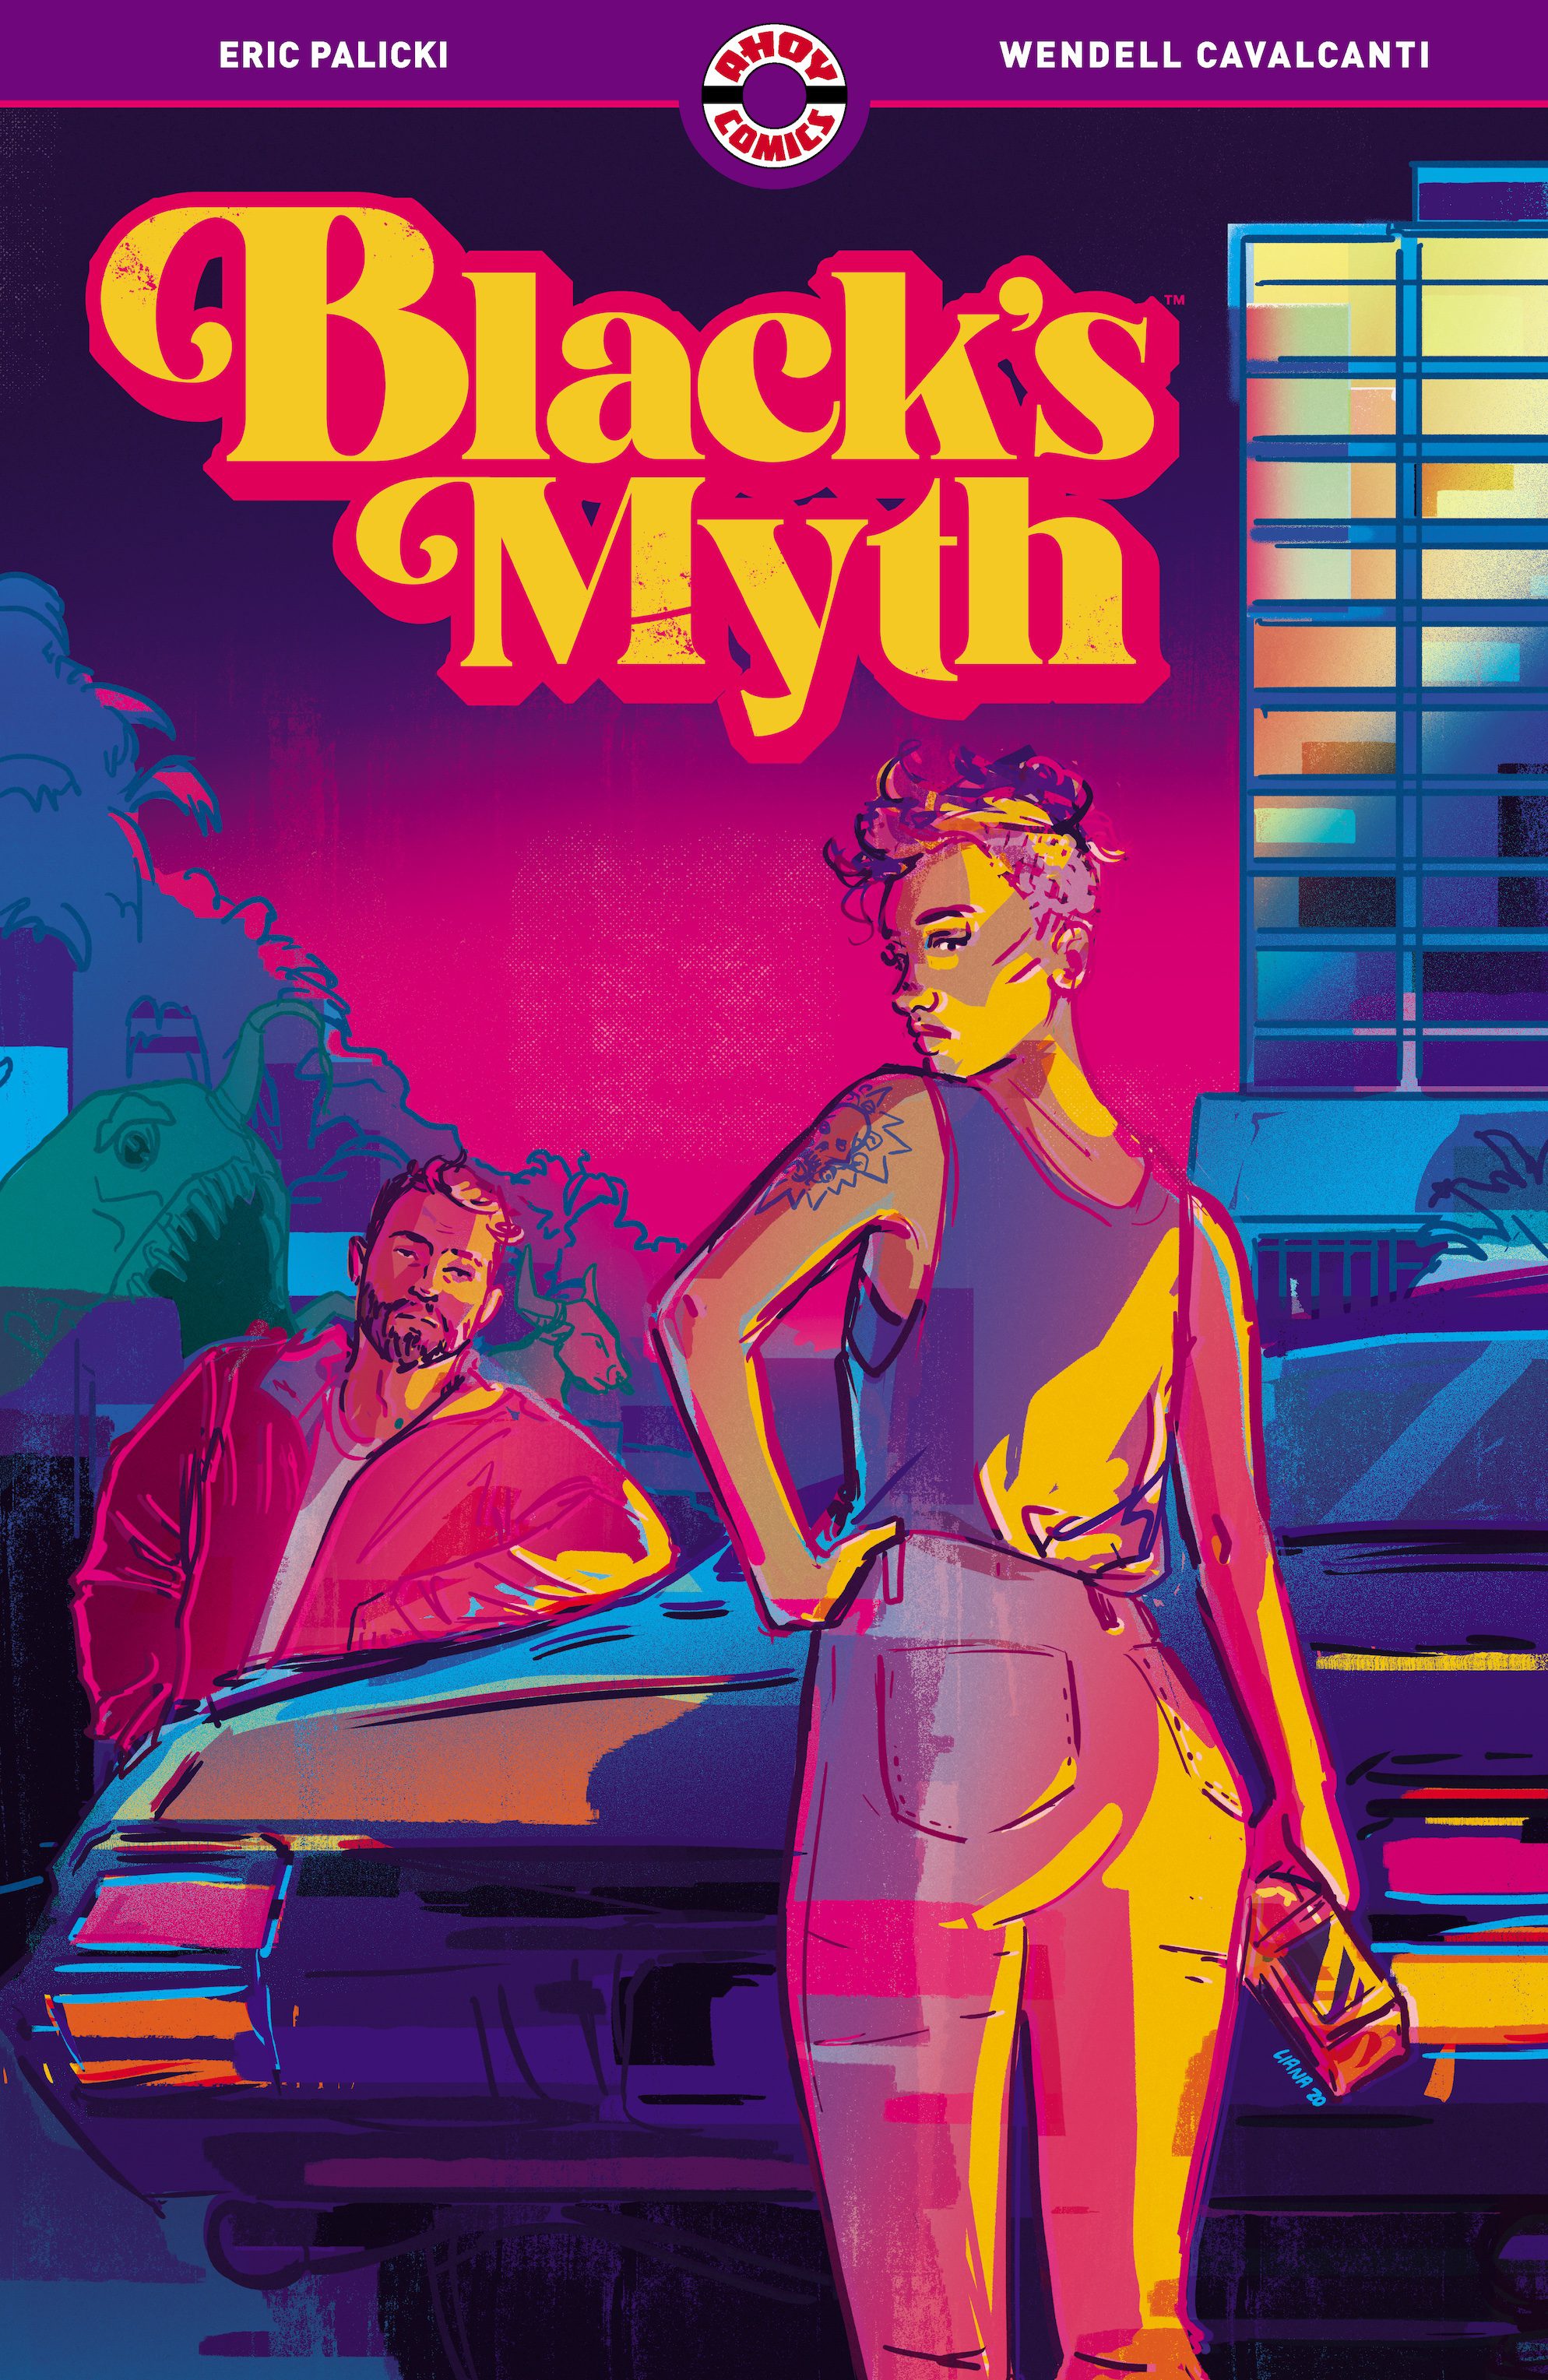 Read more about the article AHOY Comics Announces The Return of Eric Palicki and Wendell Cavalcanti’s BLACK’S MYTH